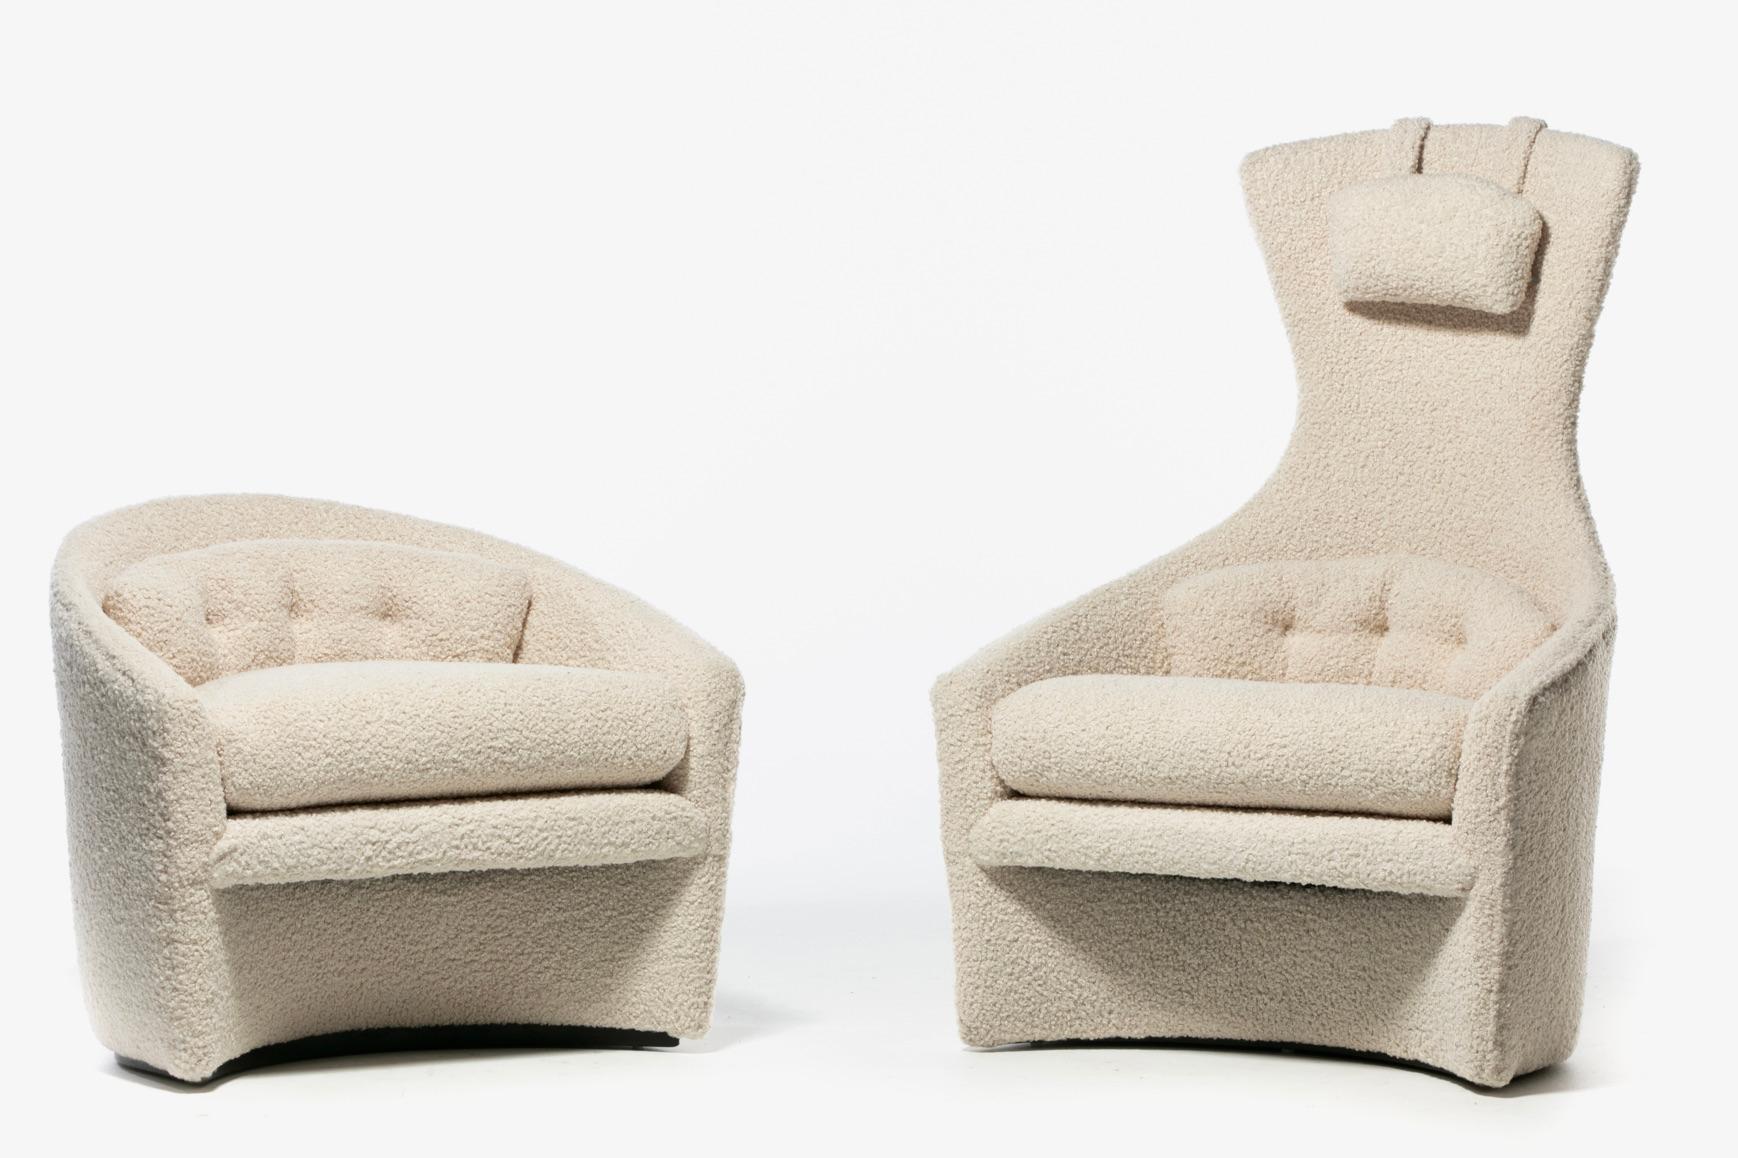 Adrian Pearsall Sculptural Mom & Pop Lounge Chairs in Ivory Bouclé, c. 1960s For Sale 11